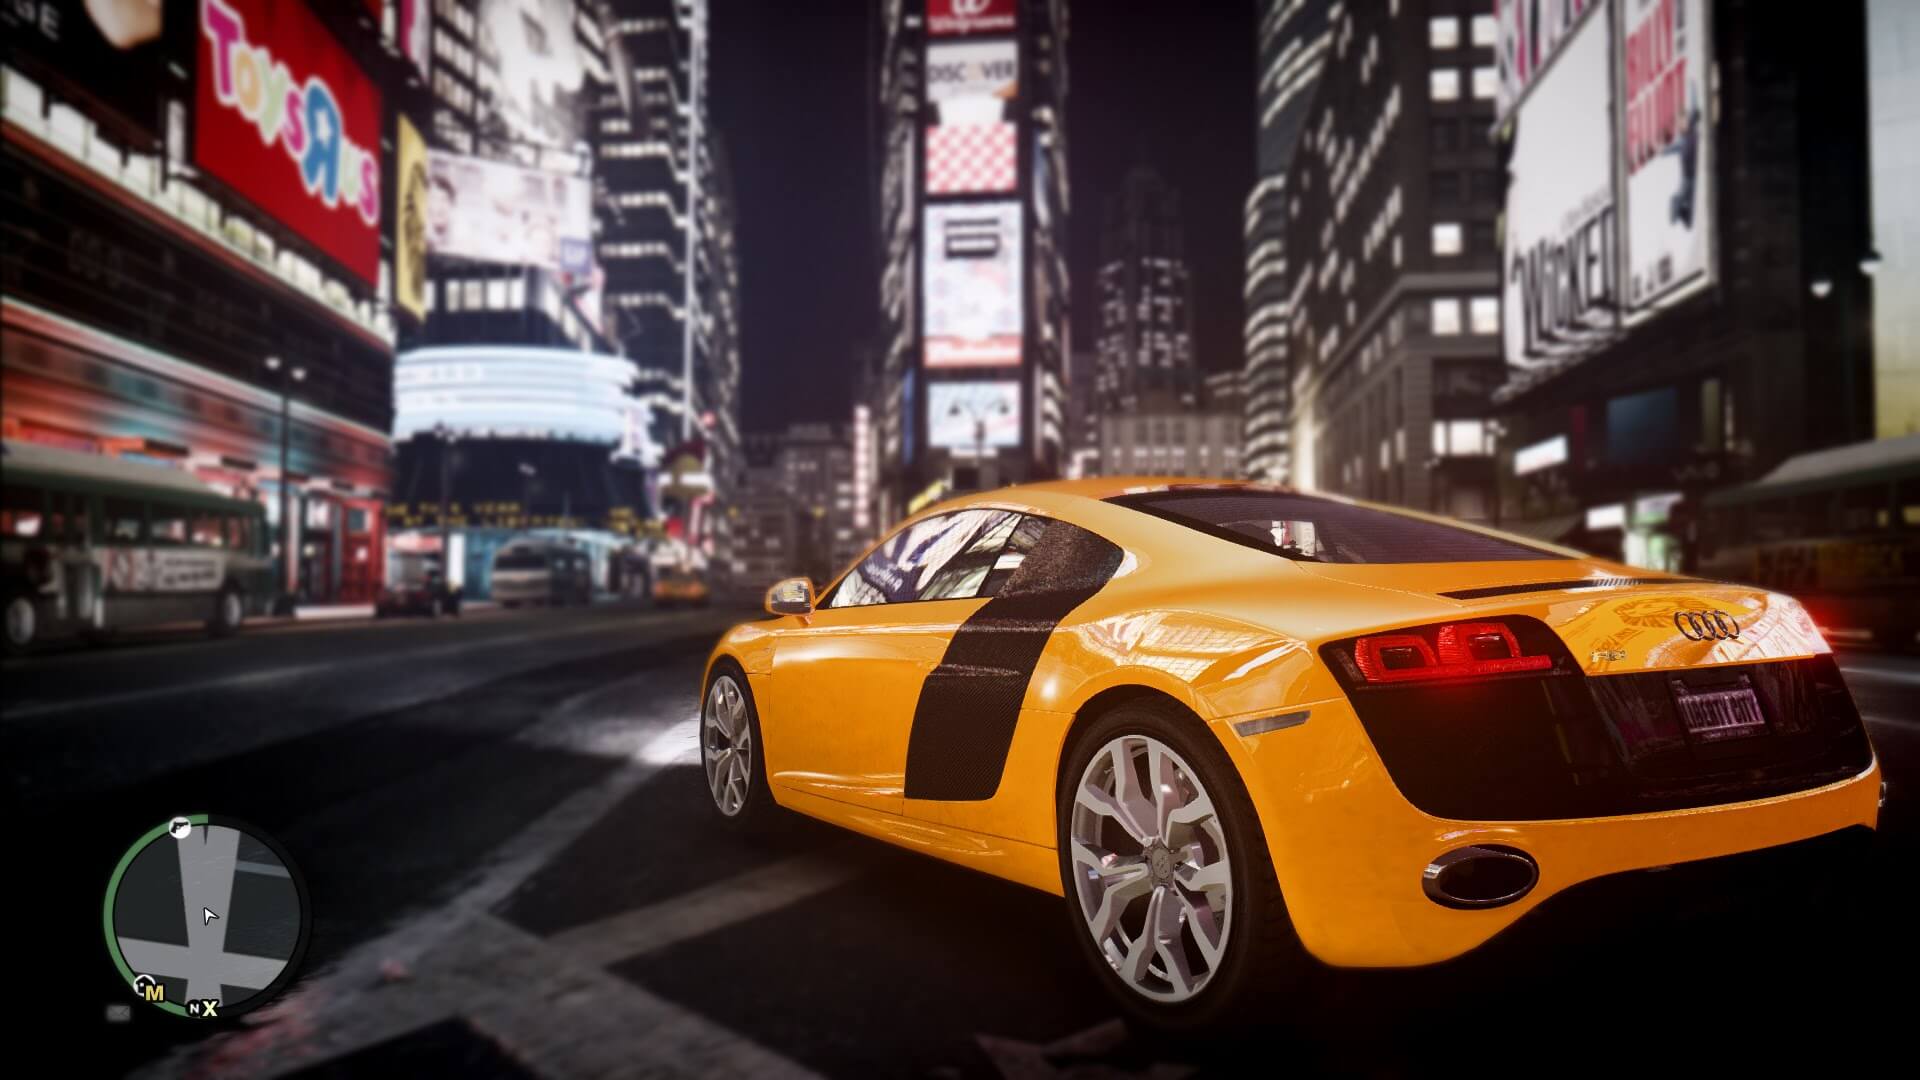 Forget GTA 6! GTA 5 and GTA Online get Ray Tracing, 4K at 60 fps, and more